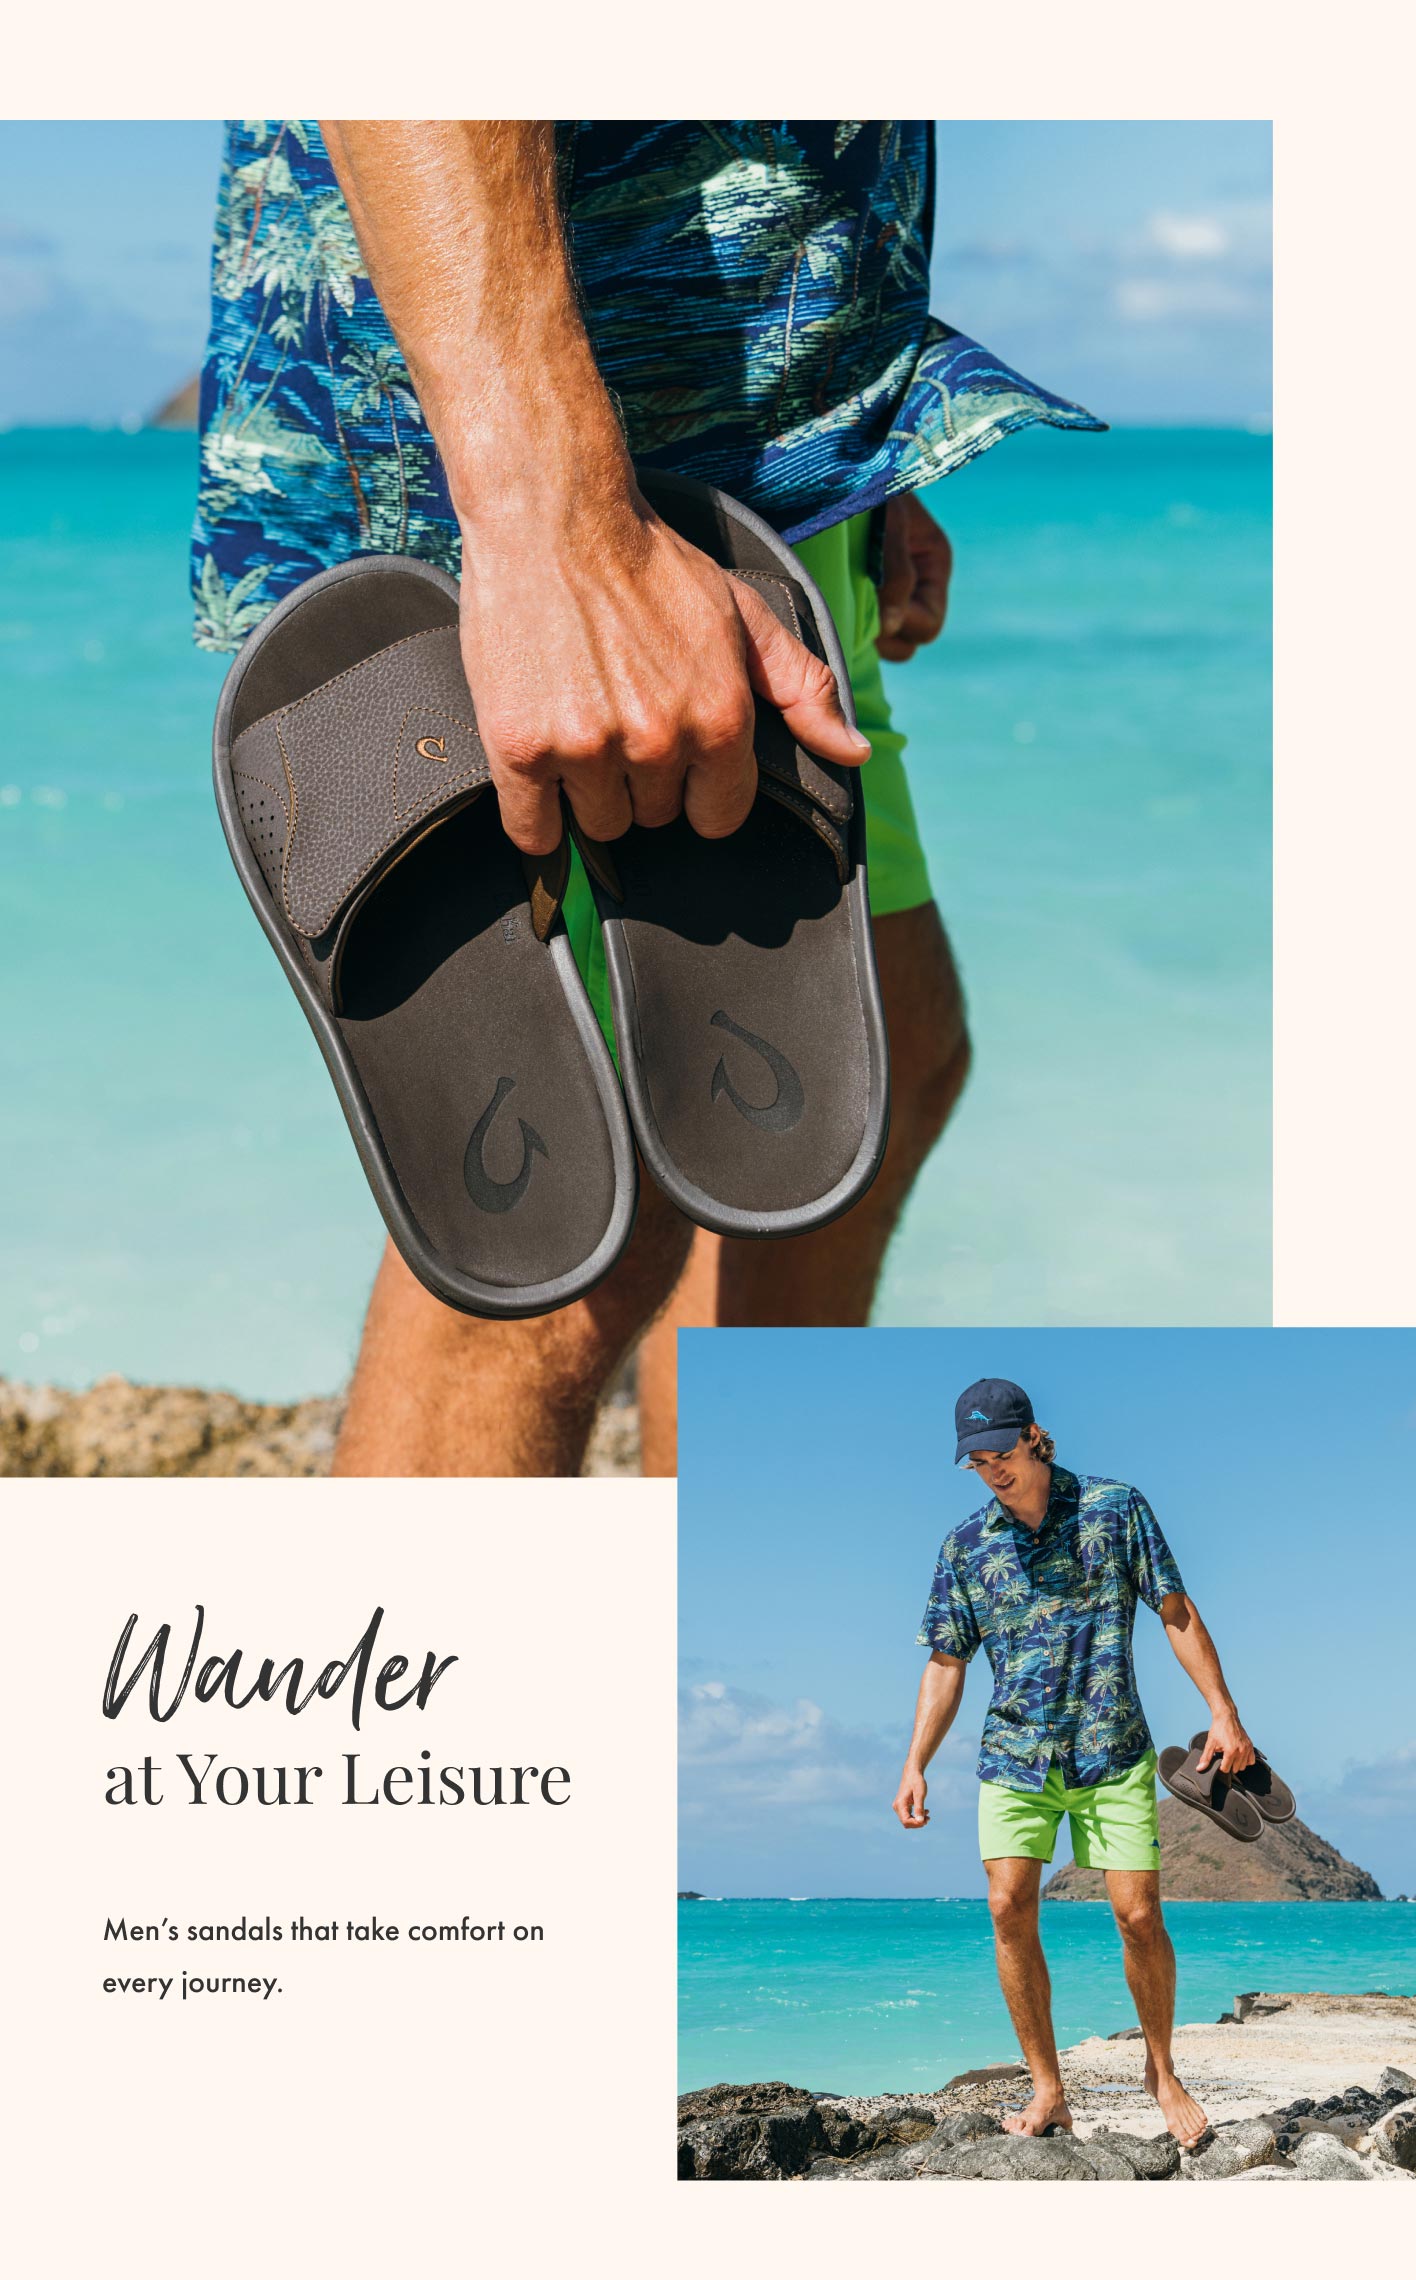 Wander at Your Leisure - Men's Sandals